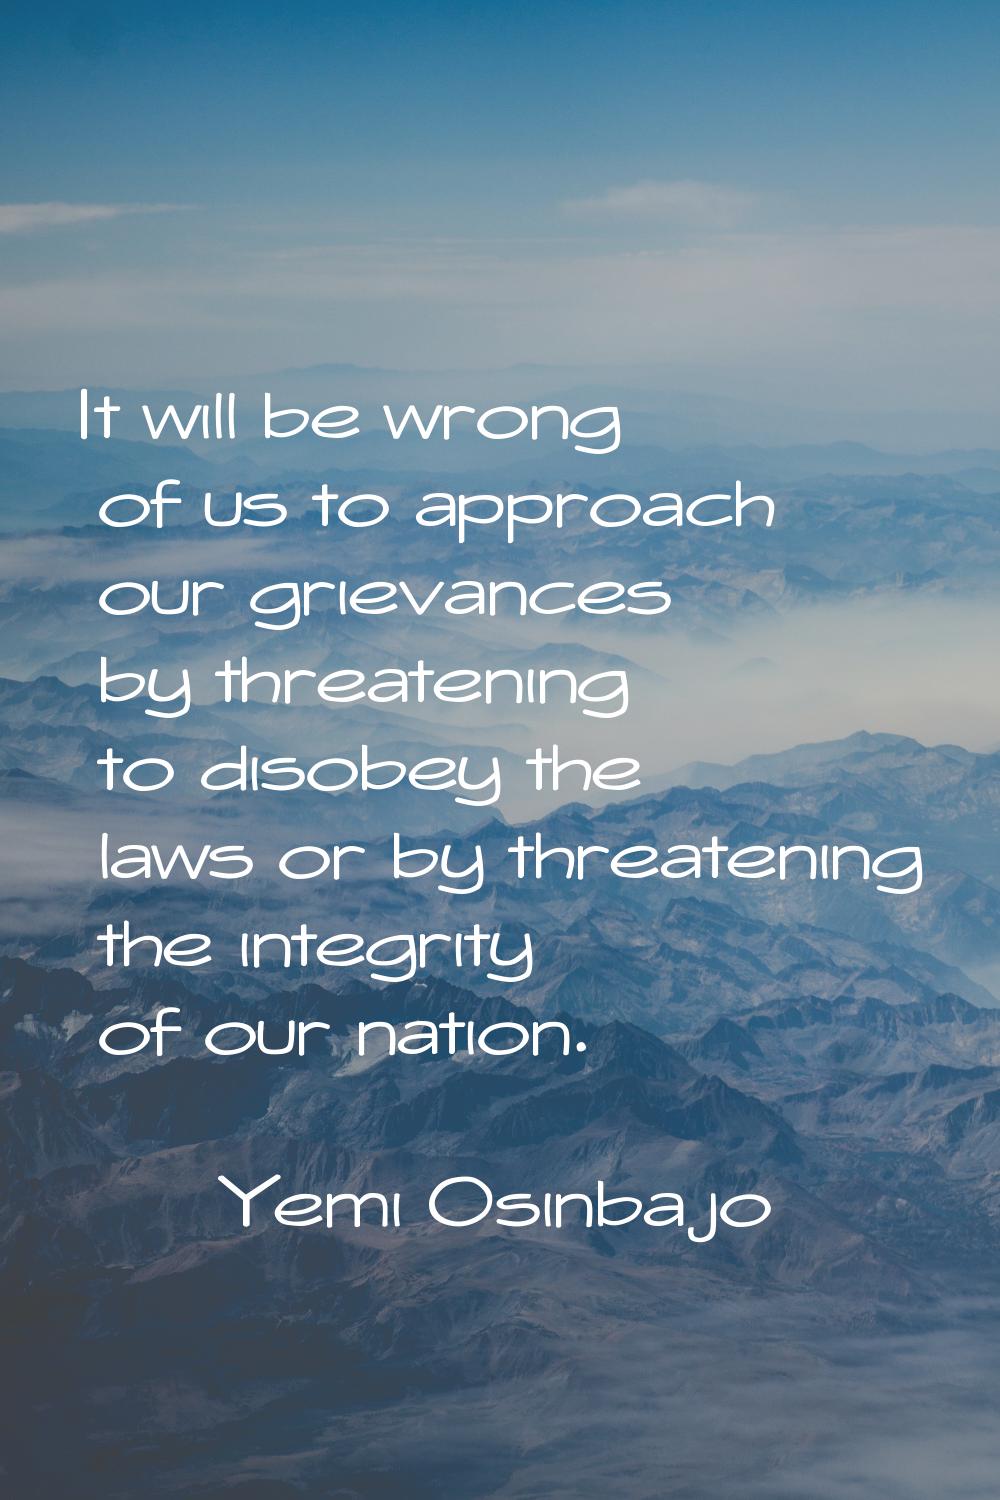 It will be wrong of us to approach our grievances by threatening to disobey the laws or by threaten